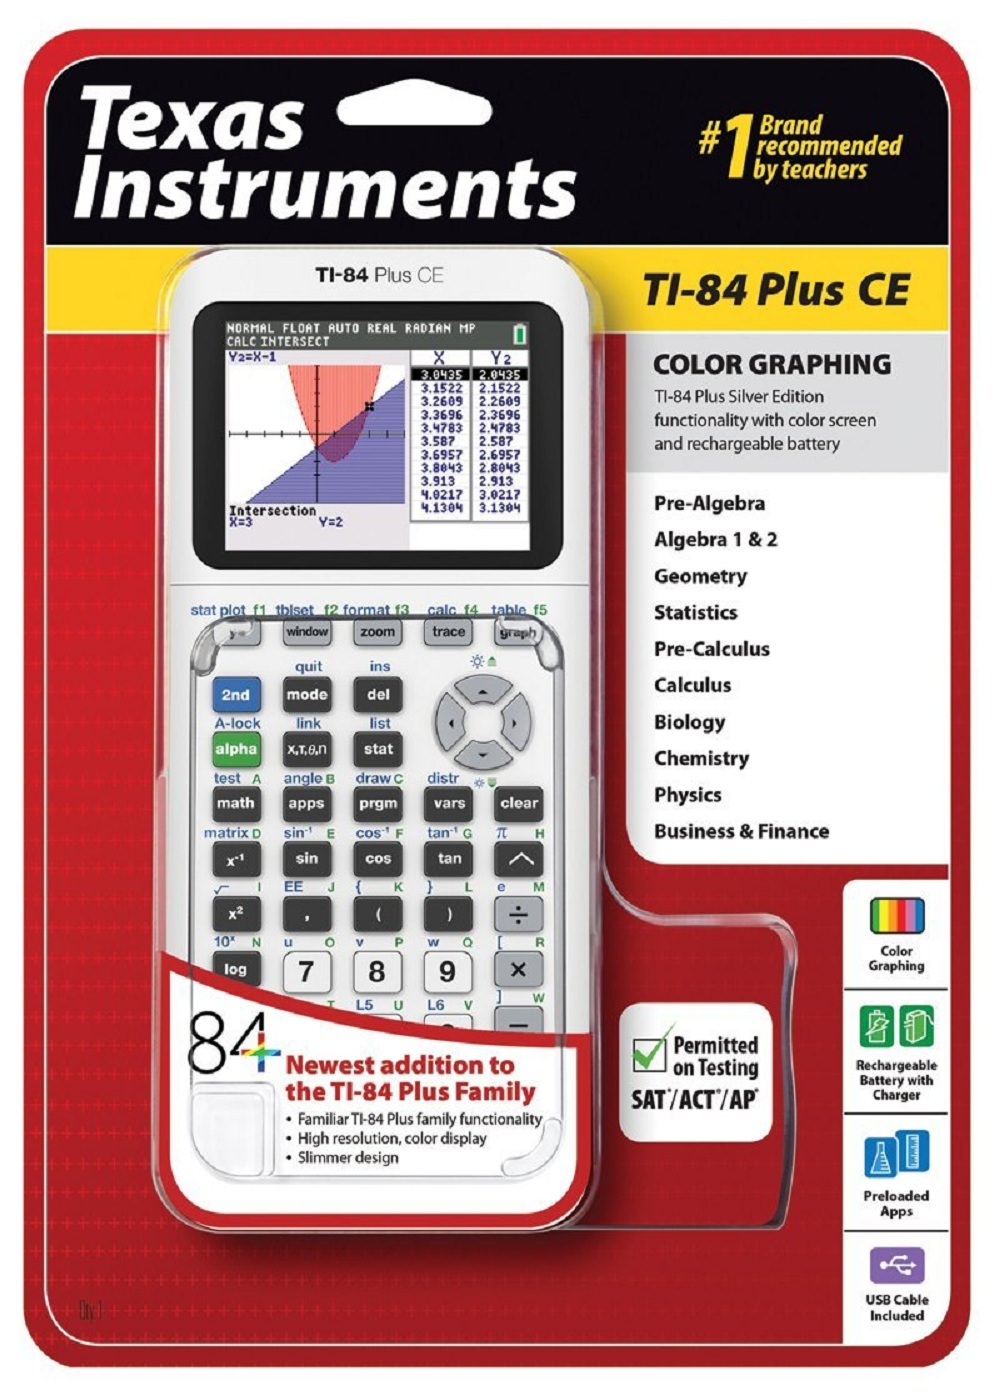 Texas Instruments TI-84 Plus CE Graphing Calculator, White - image 1 of 3